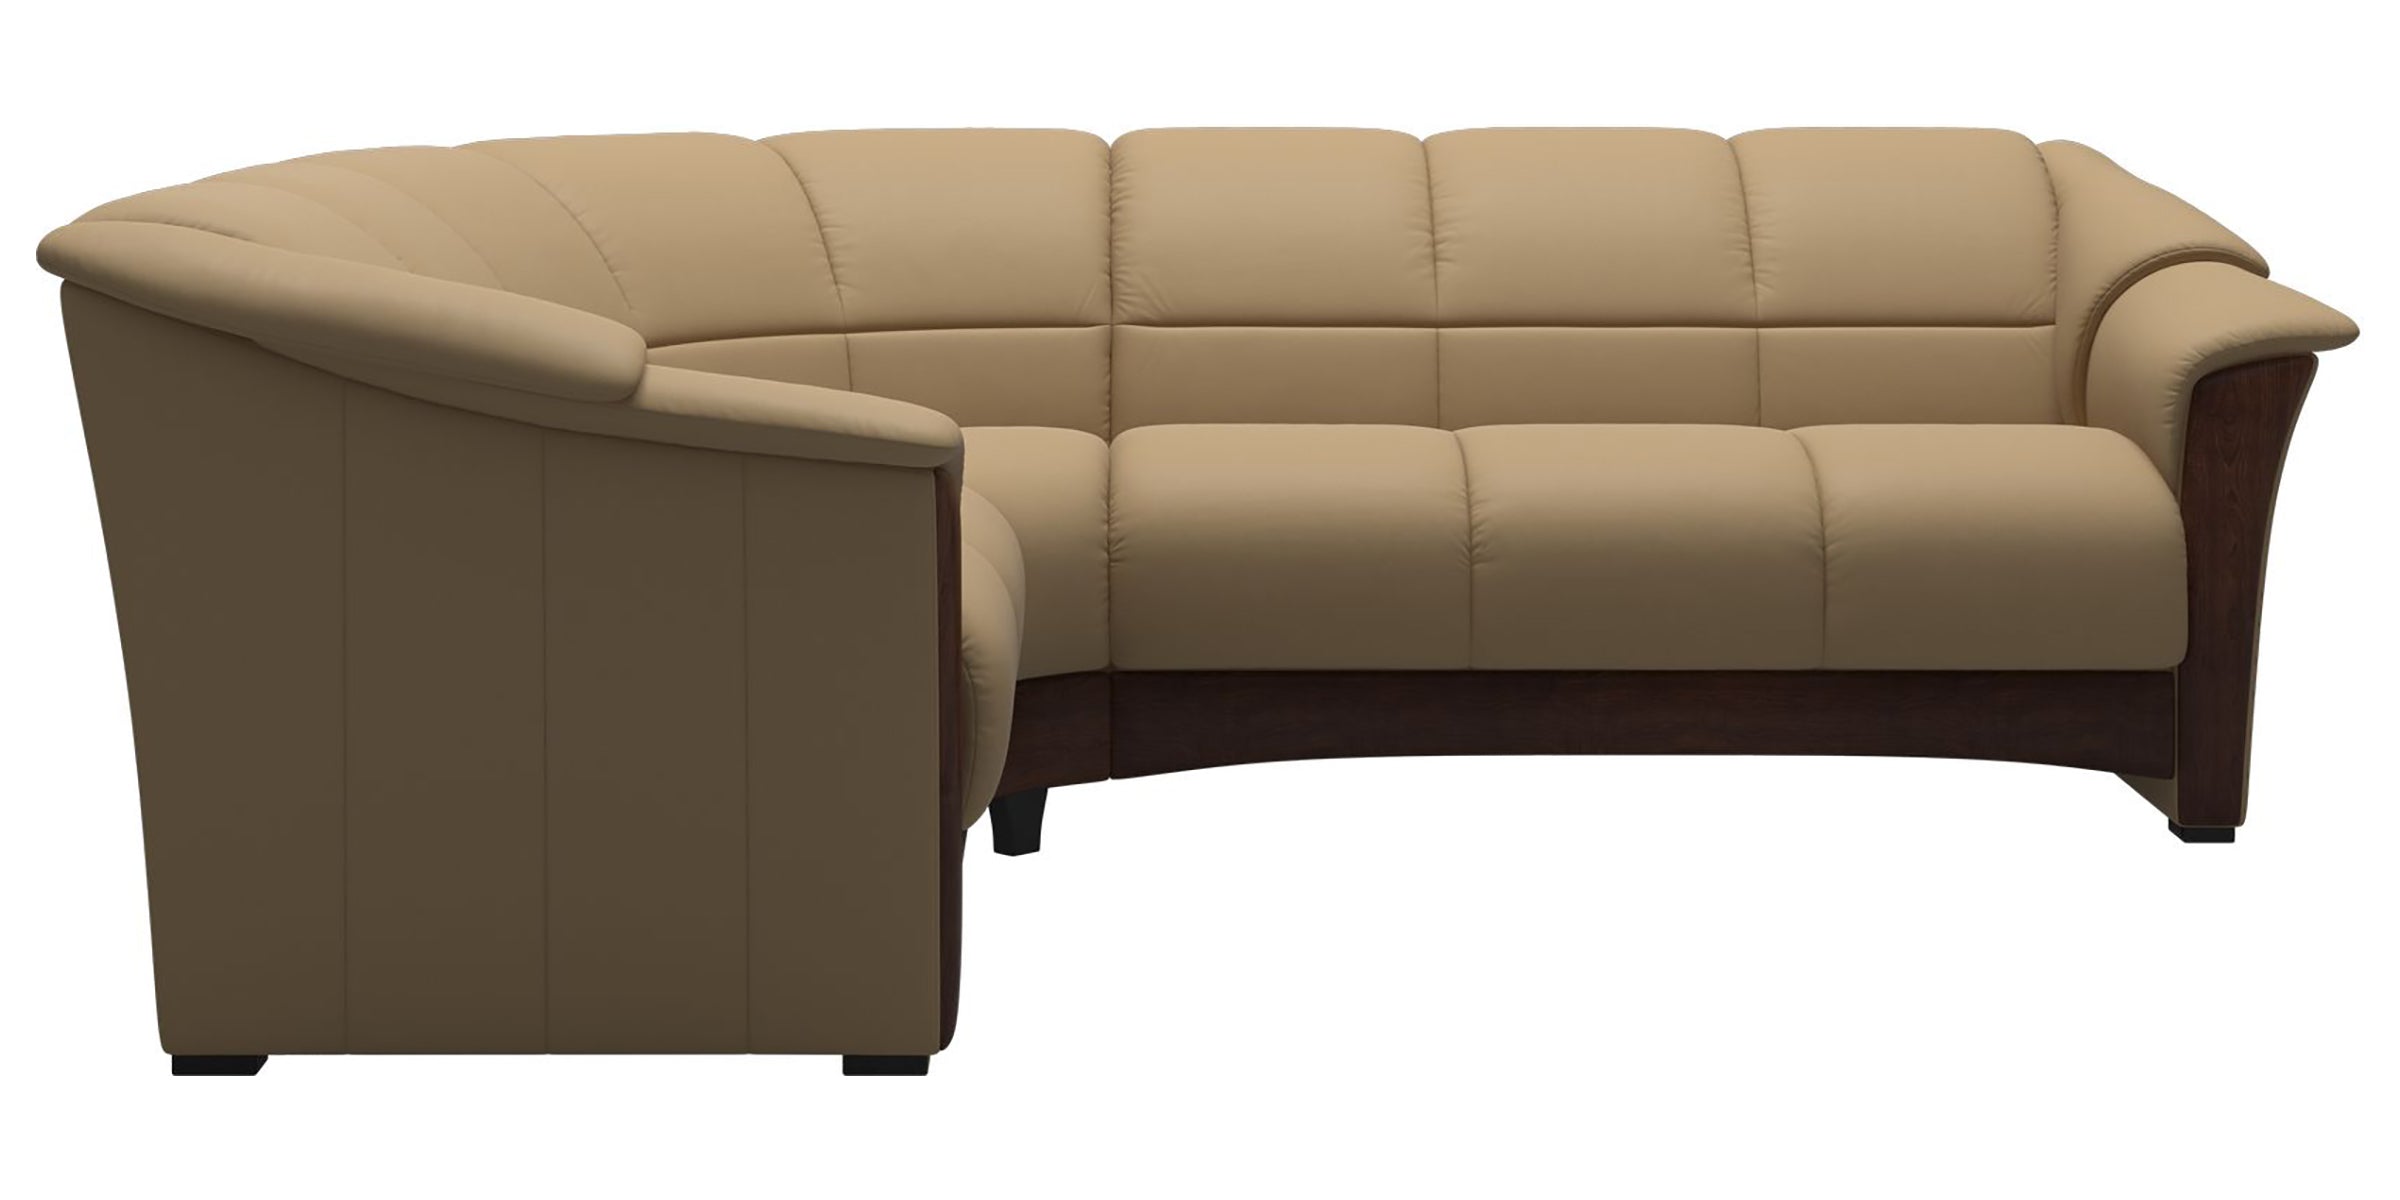 Paloma Leather Sand and Brown Base | Stressless Oslo Sectional | Valley Ridge Furniture